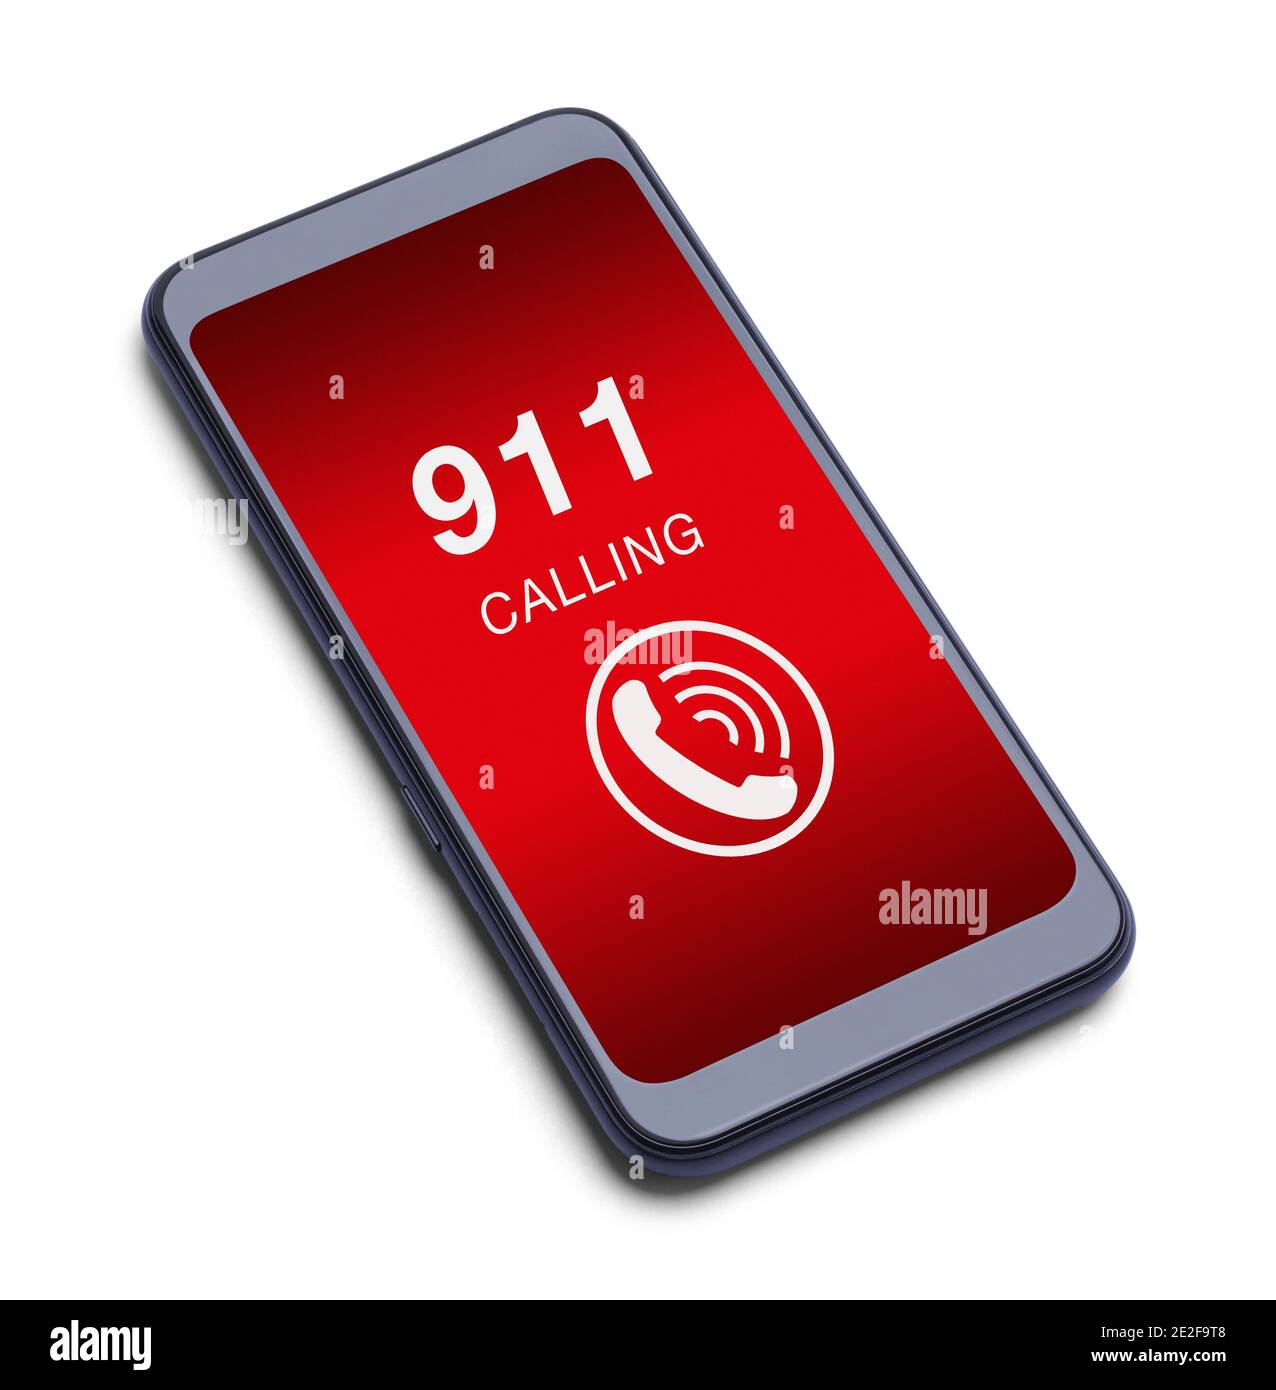 Smart Phone Calling 911 with Ringing Icon Cut Out on White. Stock Photo